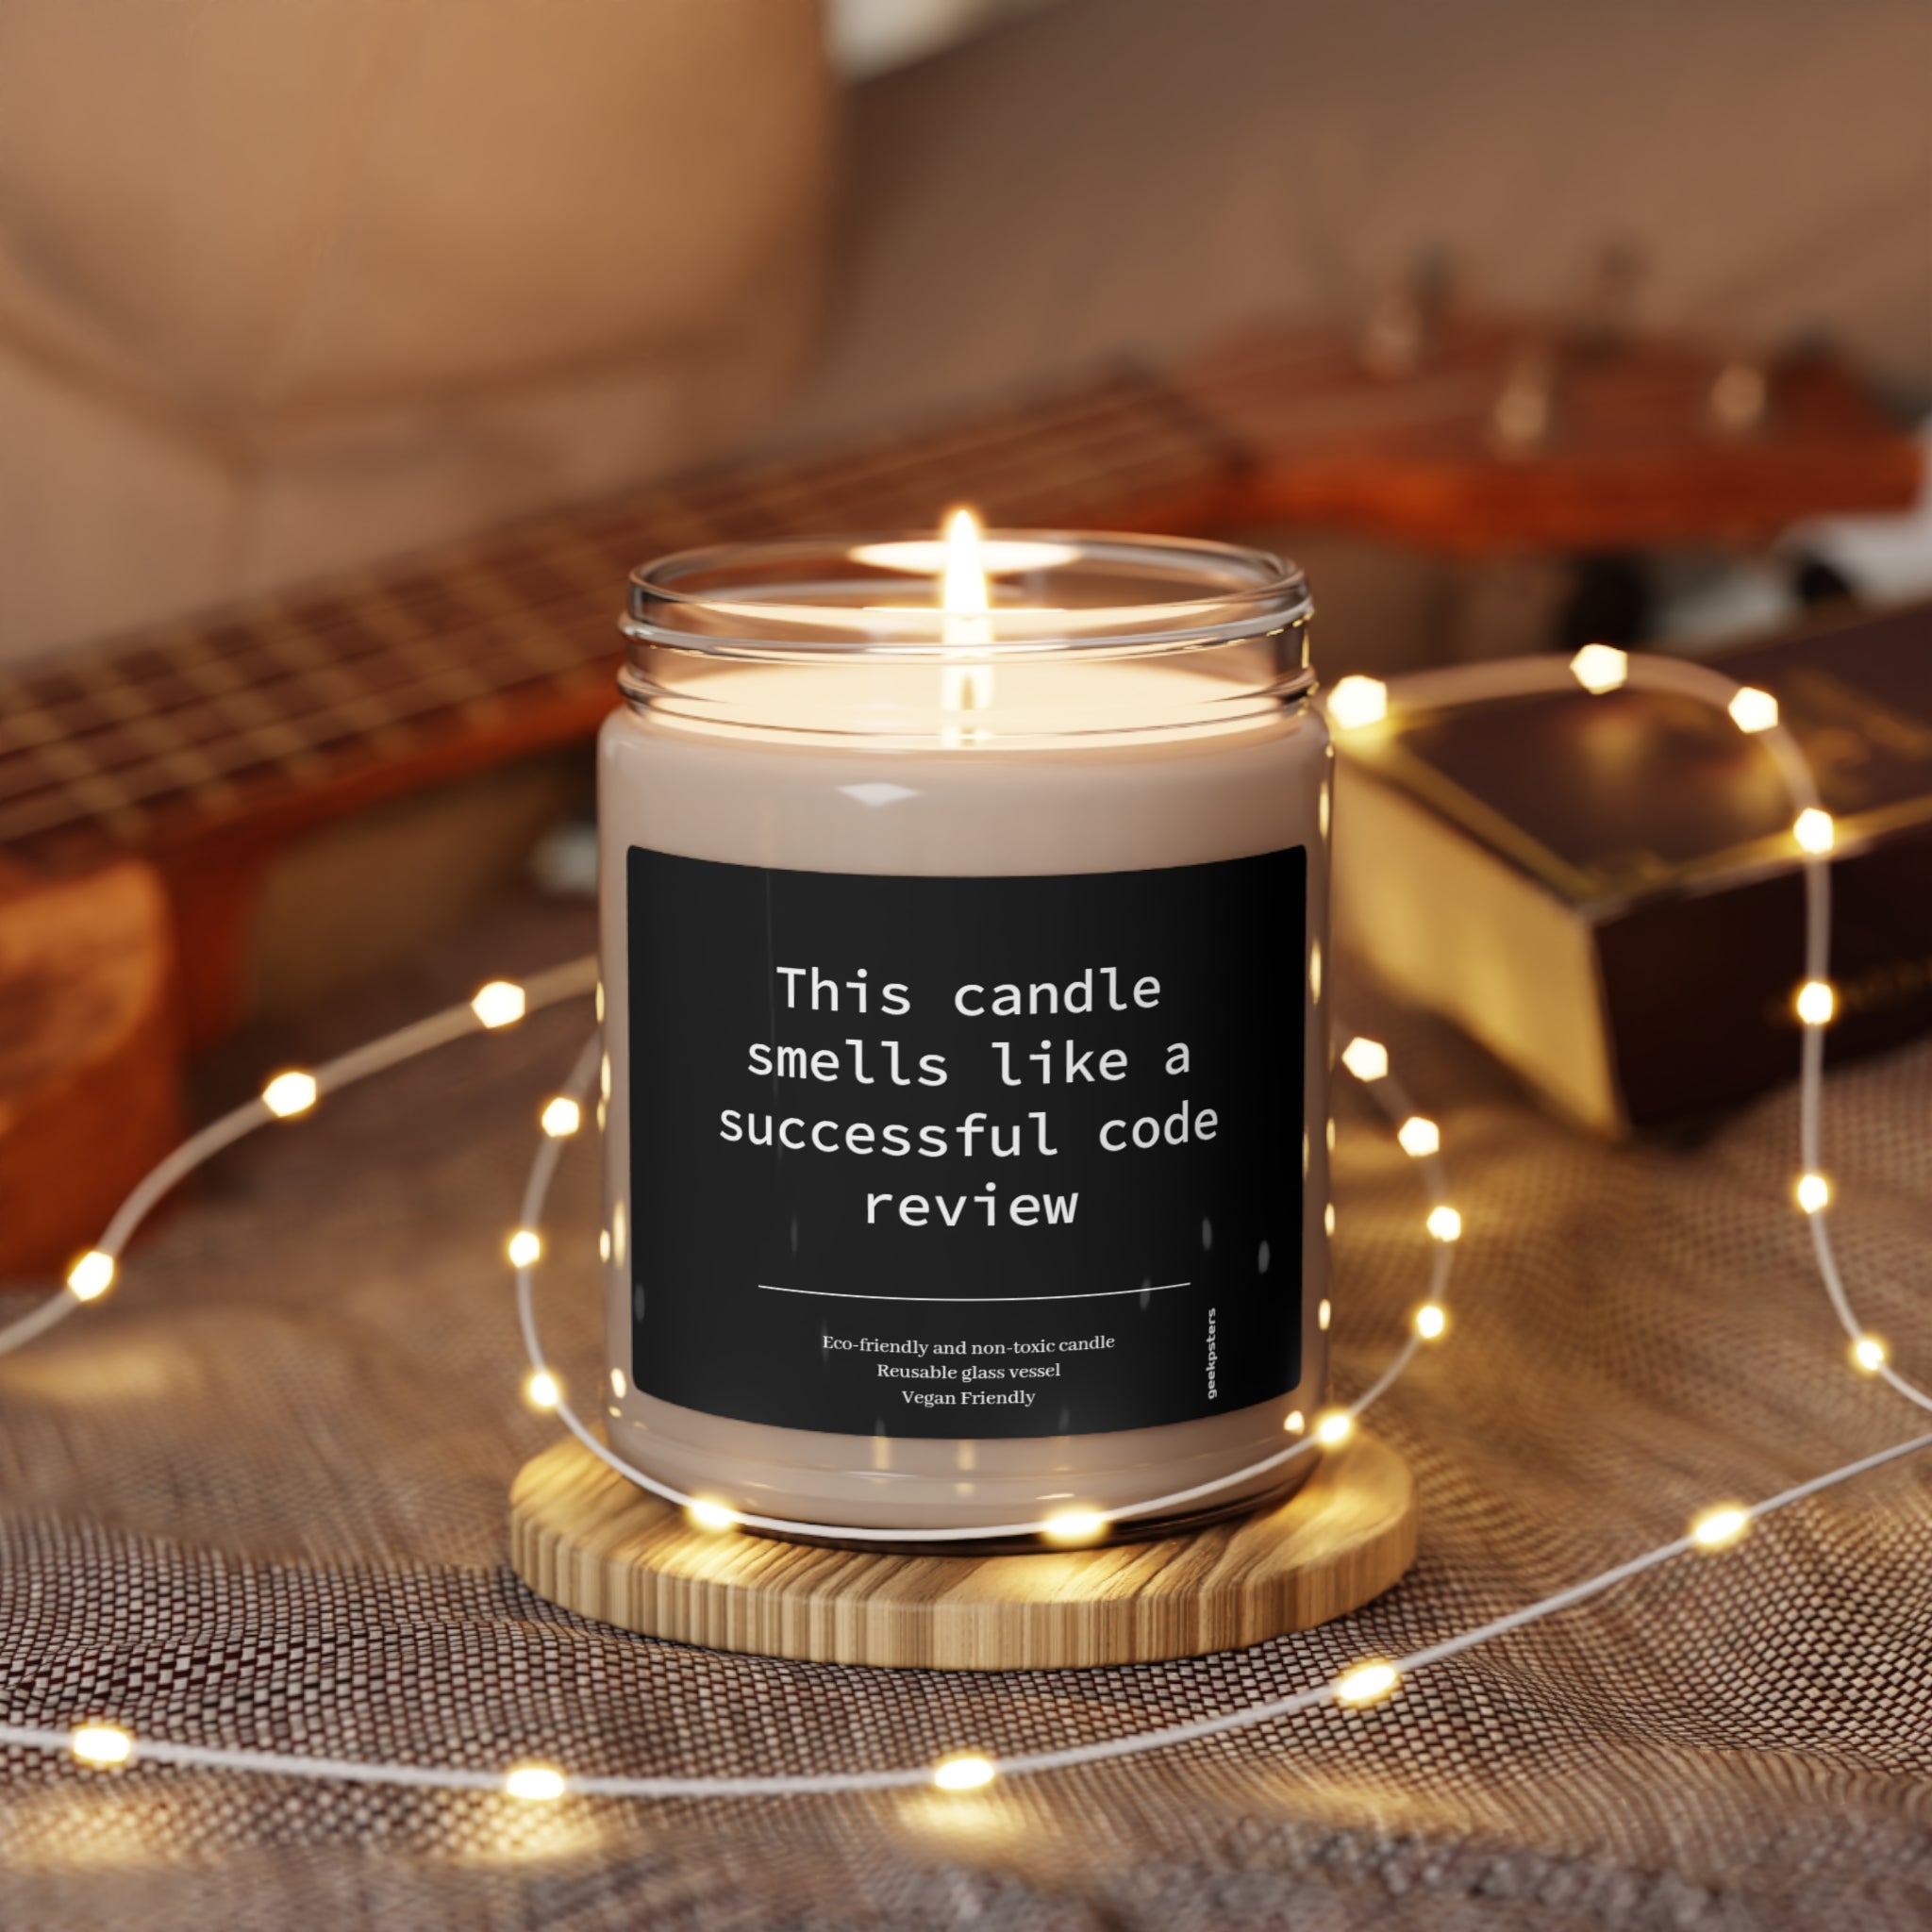 A "This Candle Smells like a Successful Code Review" scented soy candle with a label reading "this candle smells like a successful code review" on a wooden holder surrounded by twinkling lights.